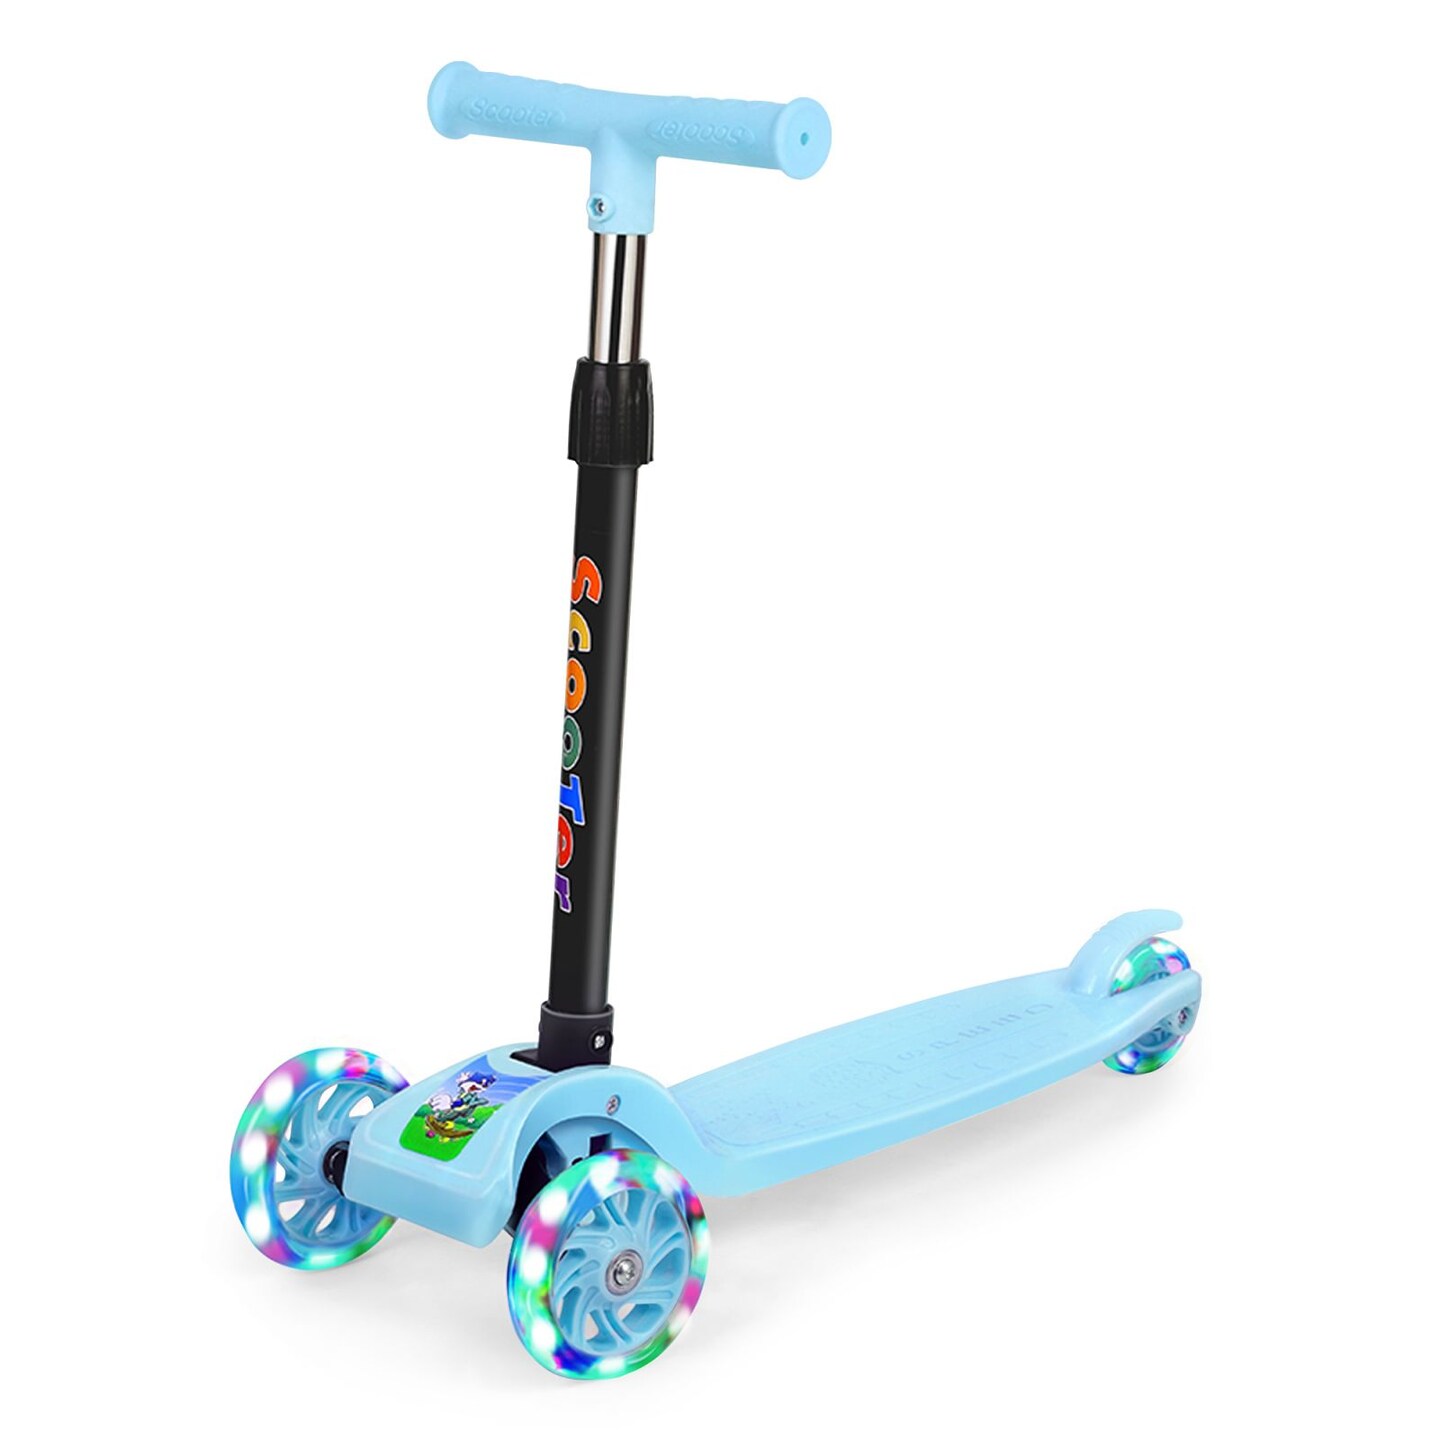 Scooter For Kids 3 Wheel Kick Scooter For Toddler Girls Boys